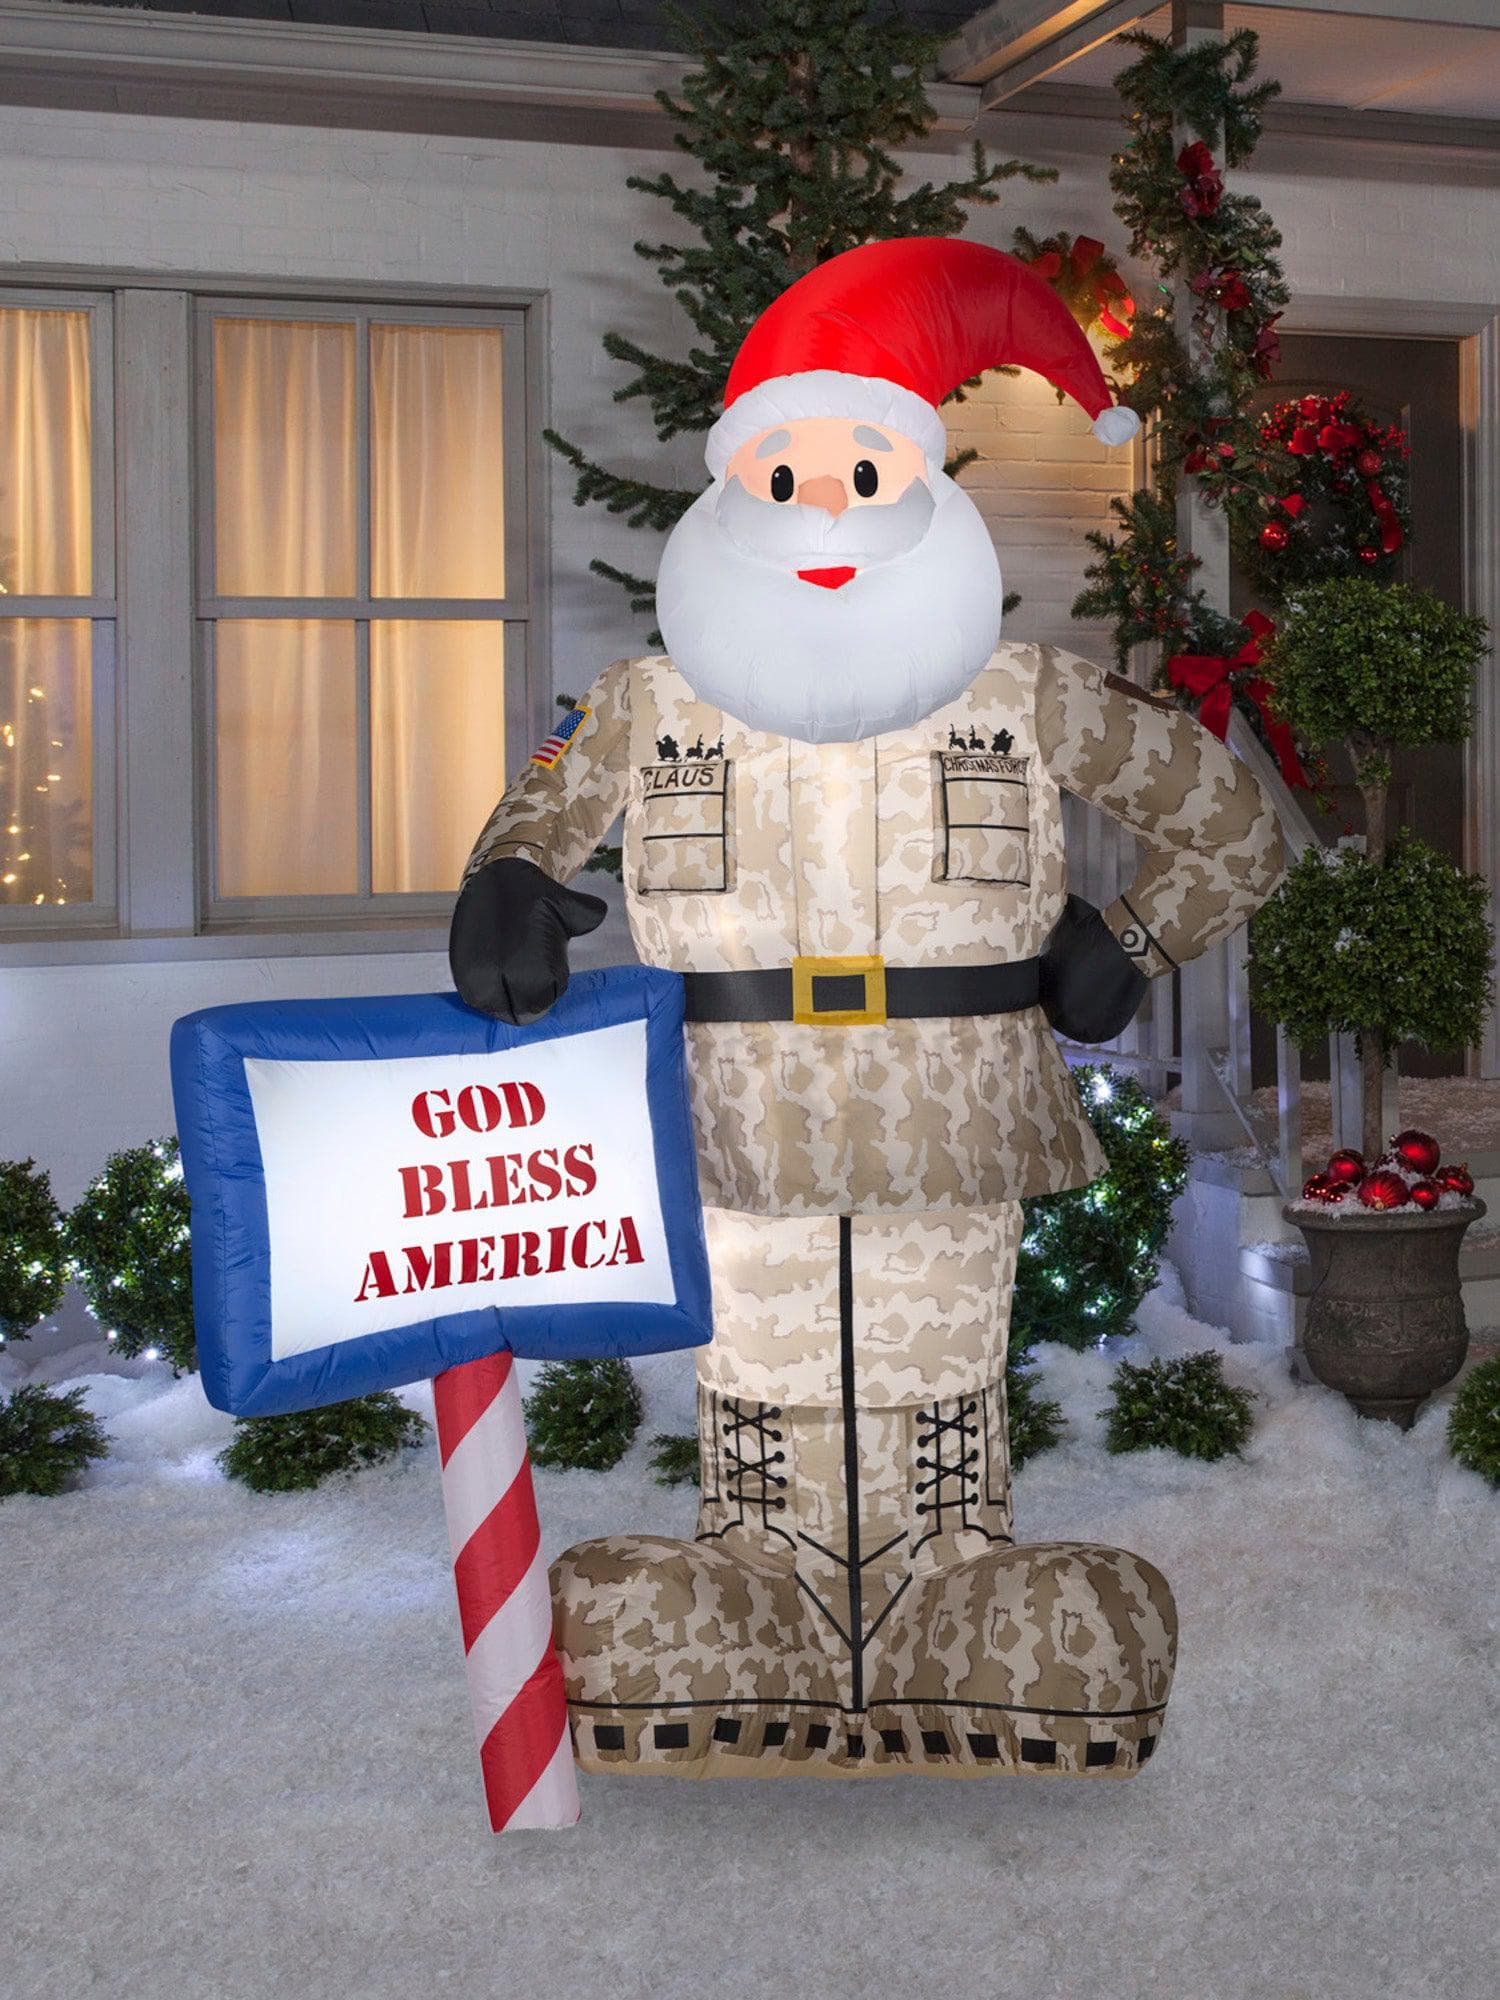 7 Foot Military Santa Light Up Christmas Inflatable Lawn Decor - costumes.com